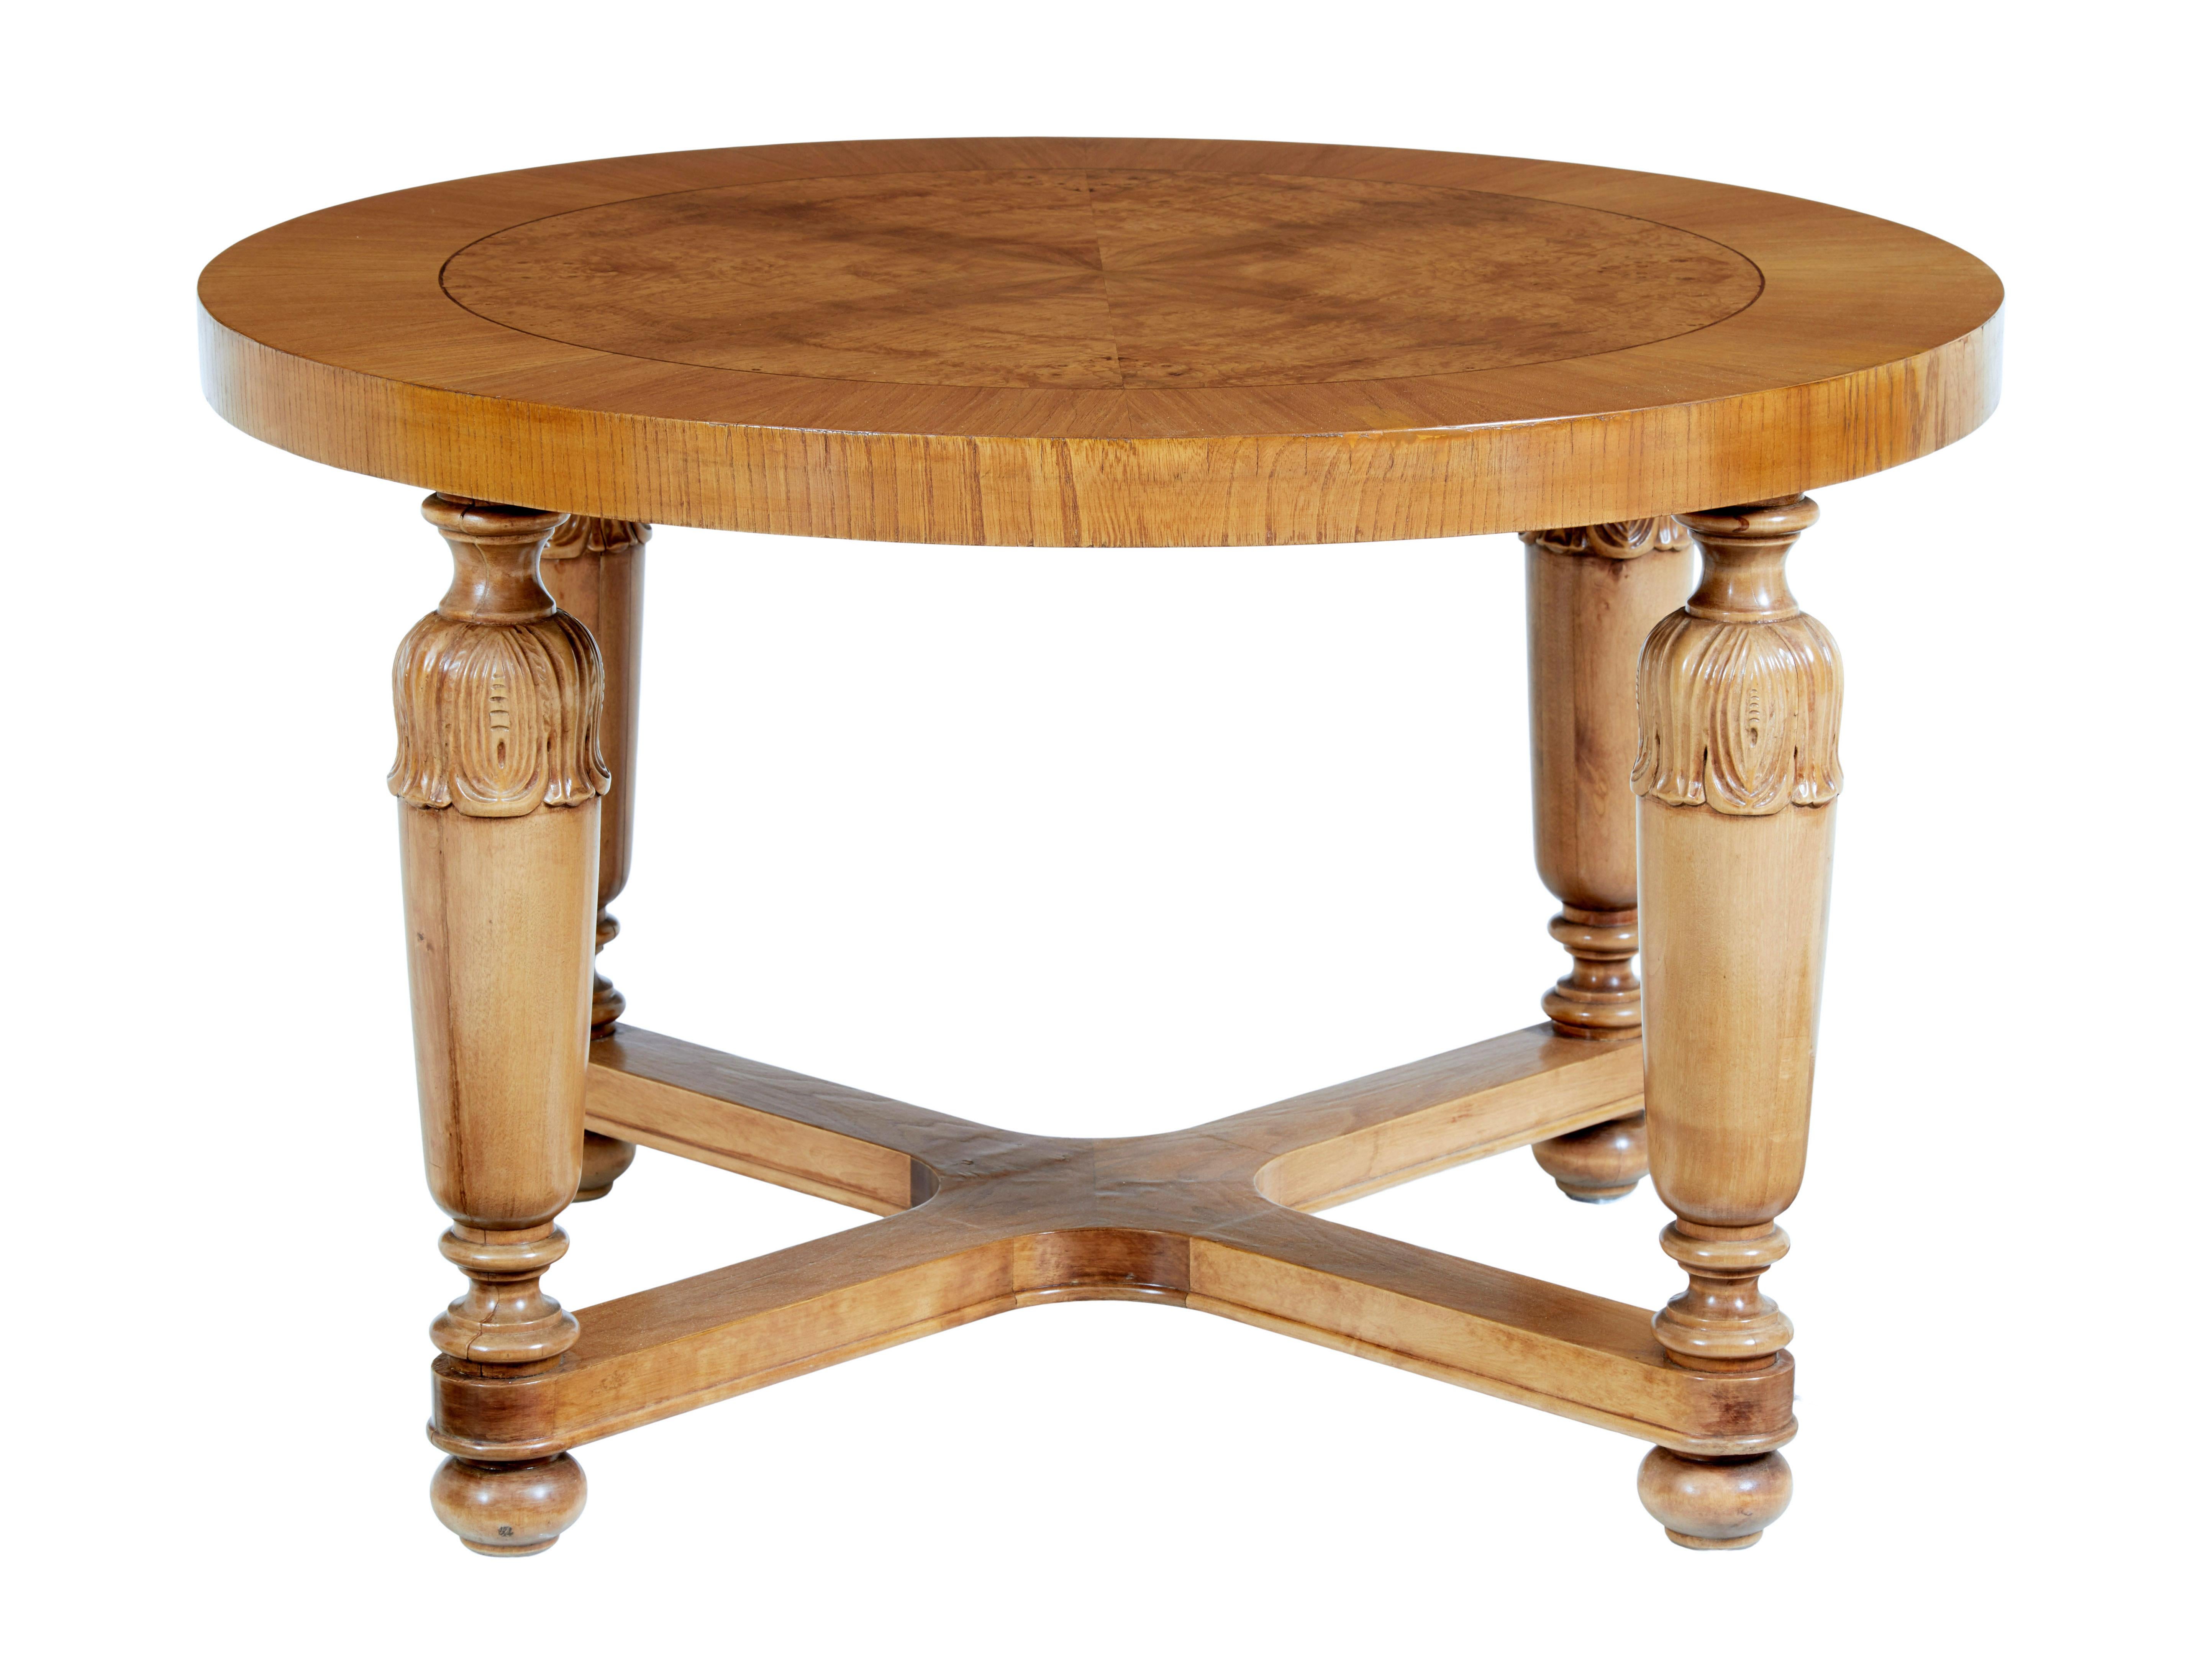 Art deco Swedish carved birch and elm coffee table, circa 1930.

Circular art deco period coffee, with quarter veneer burr birch center, strung edge and elm veneered outer edge. Standing on 4-carved legs which are slightly tapered, united by an